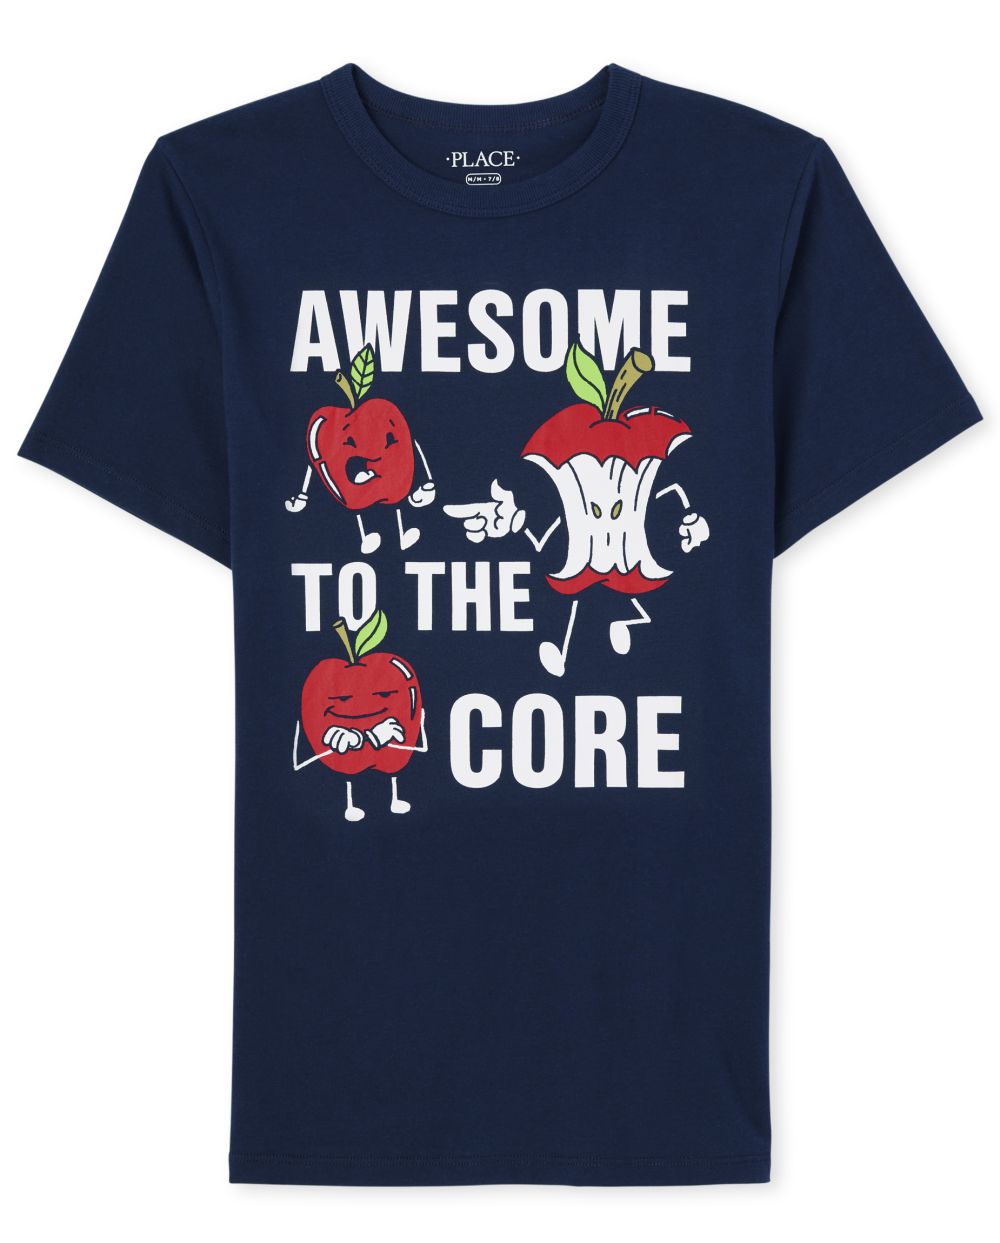 The Children's Place Boys Awesome Graphic Tee - Blue - Xs (4),S (5/6),M (7/8),L (10/12),Xl (14),Xxl (16),